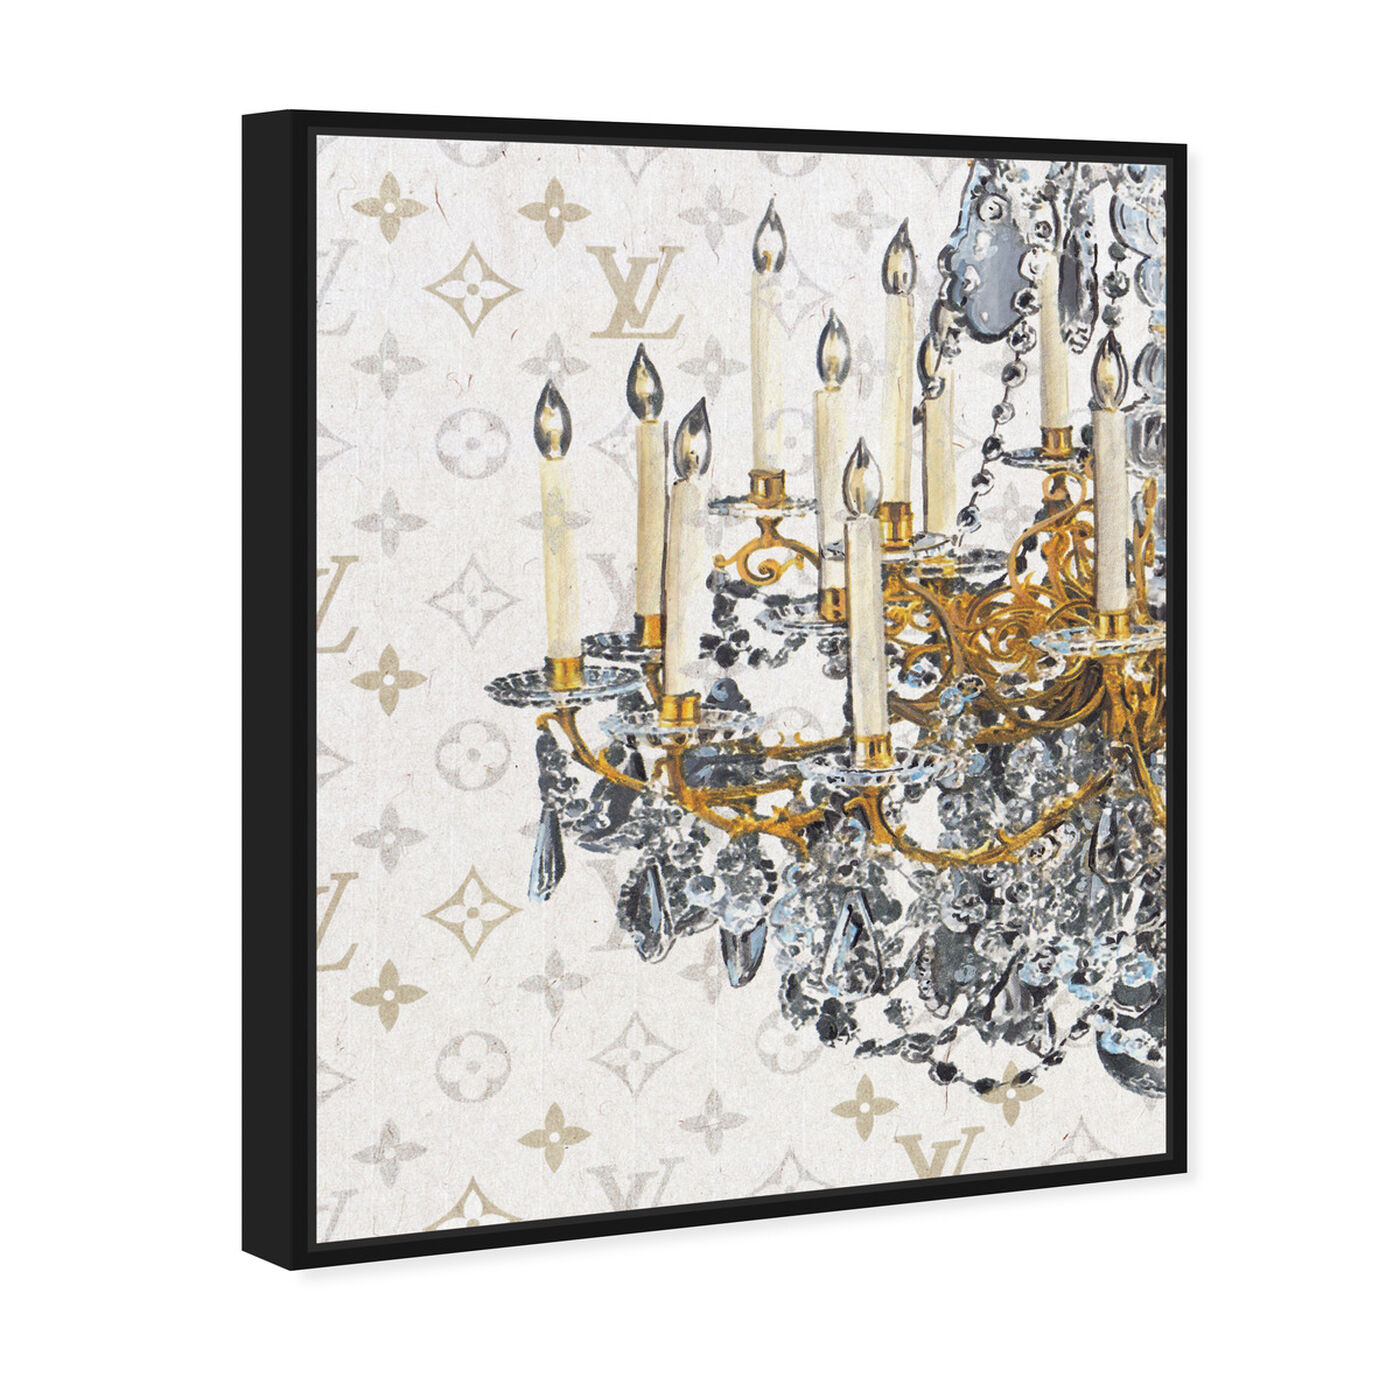 Fancy Light I | Fashion and Glam Wall Art by The Oliver Gal